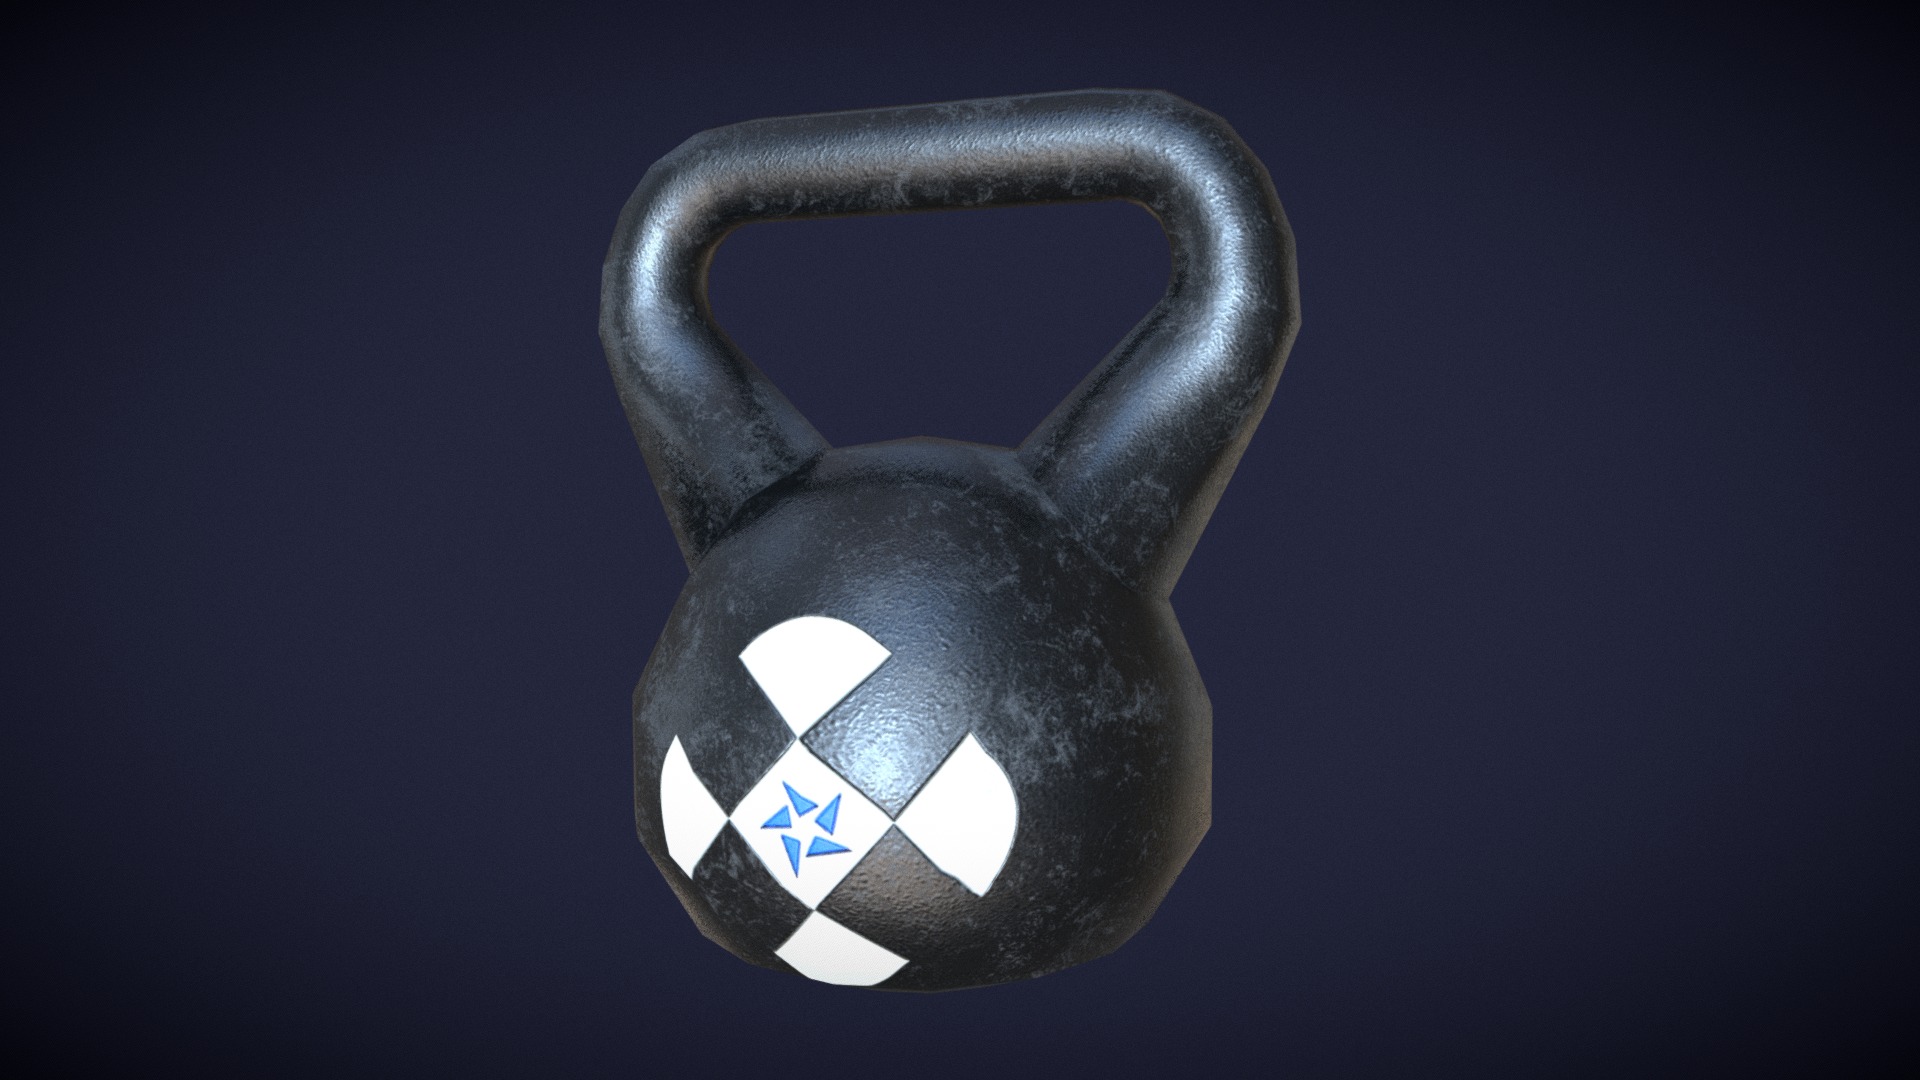 3D model Gym Kettlebell – Low Poly - This is a 3D model of the Gym Kettlebell - Low Poly. The 3D model is about a black and silver cat.